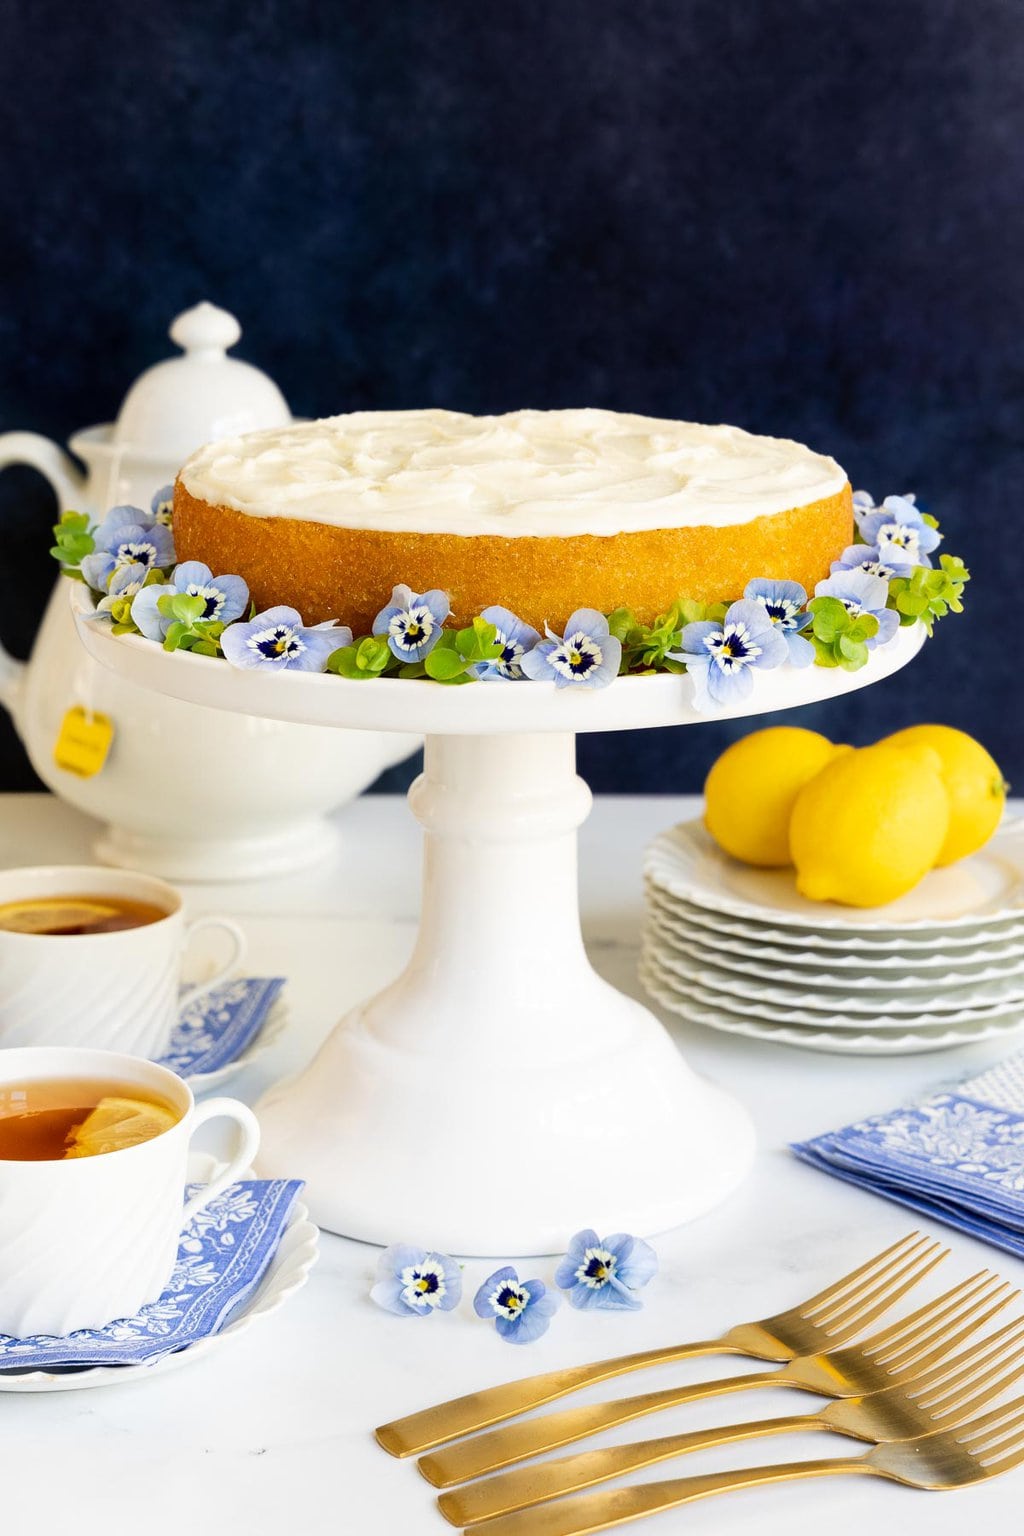 Vertical photo of a Ridiculously Easy Lemon Buttermilk Cake on a tall white pedestal serving plate. The cake is surrounded by delft blue pansies.